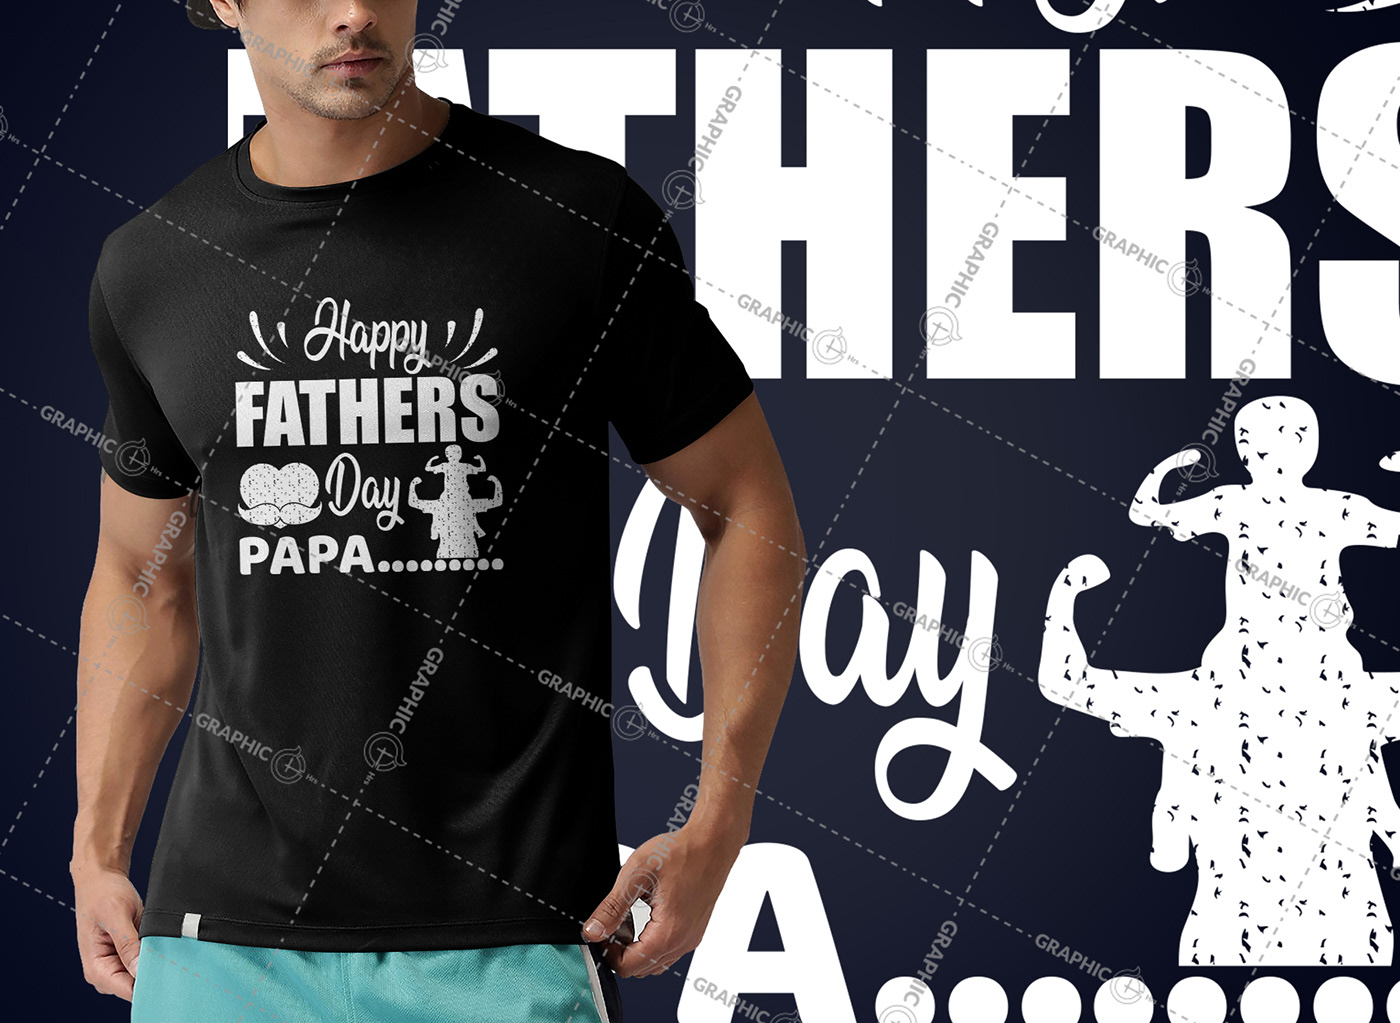 dad design father Father's Day father's day t-shirt graphic design  happy t-shirt typography   vintage t-shirt